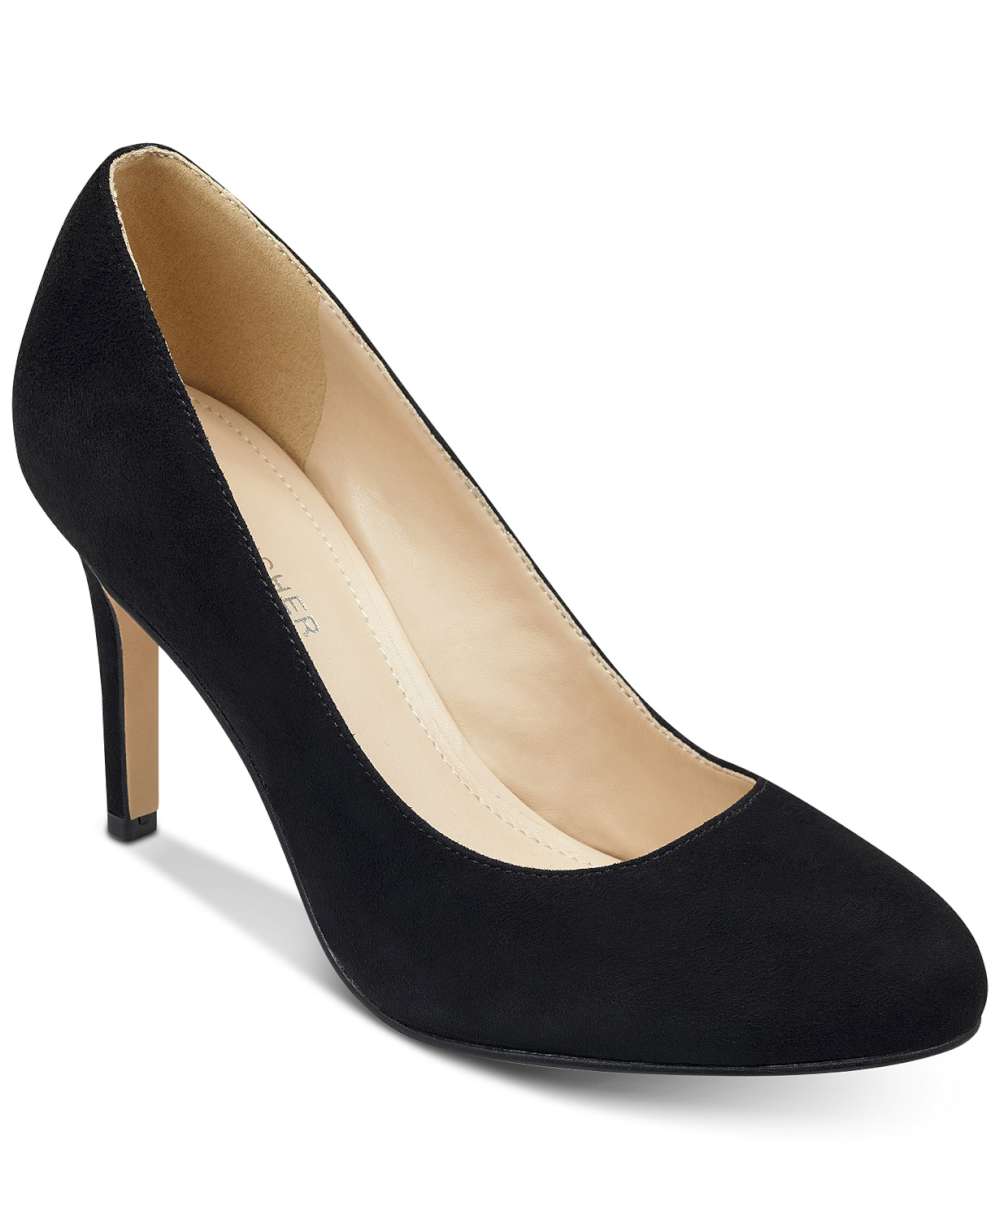 Marc Fisher Womens Chris2 Leather Round Toe Classic Pumps, Black, Size ...